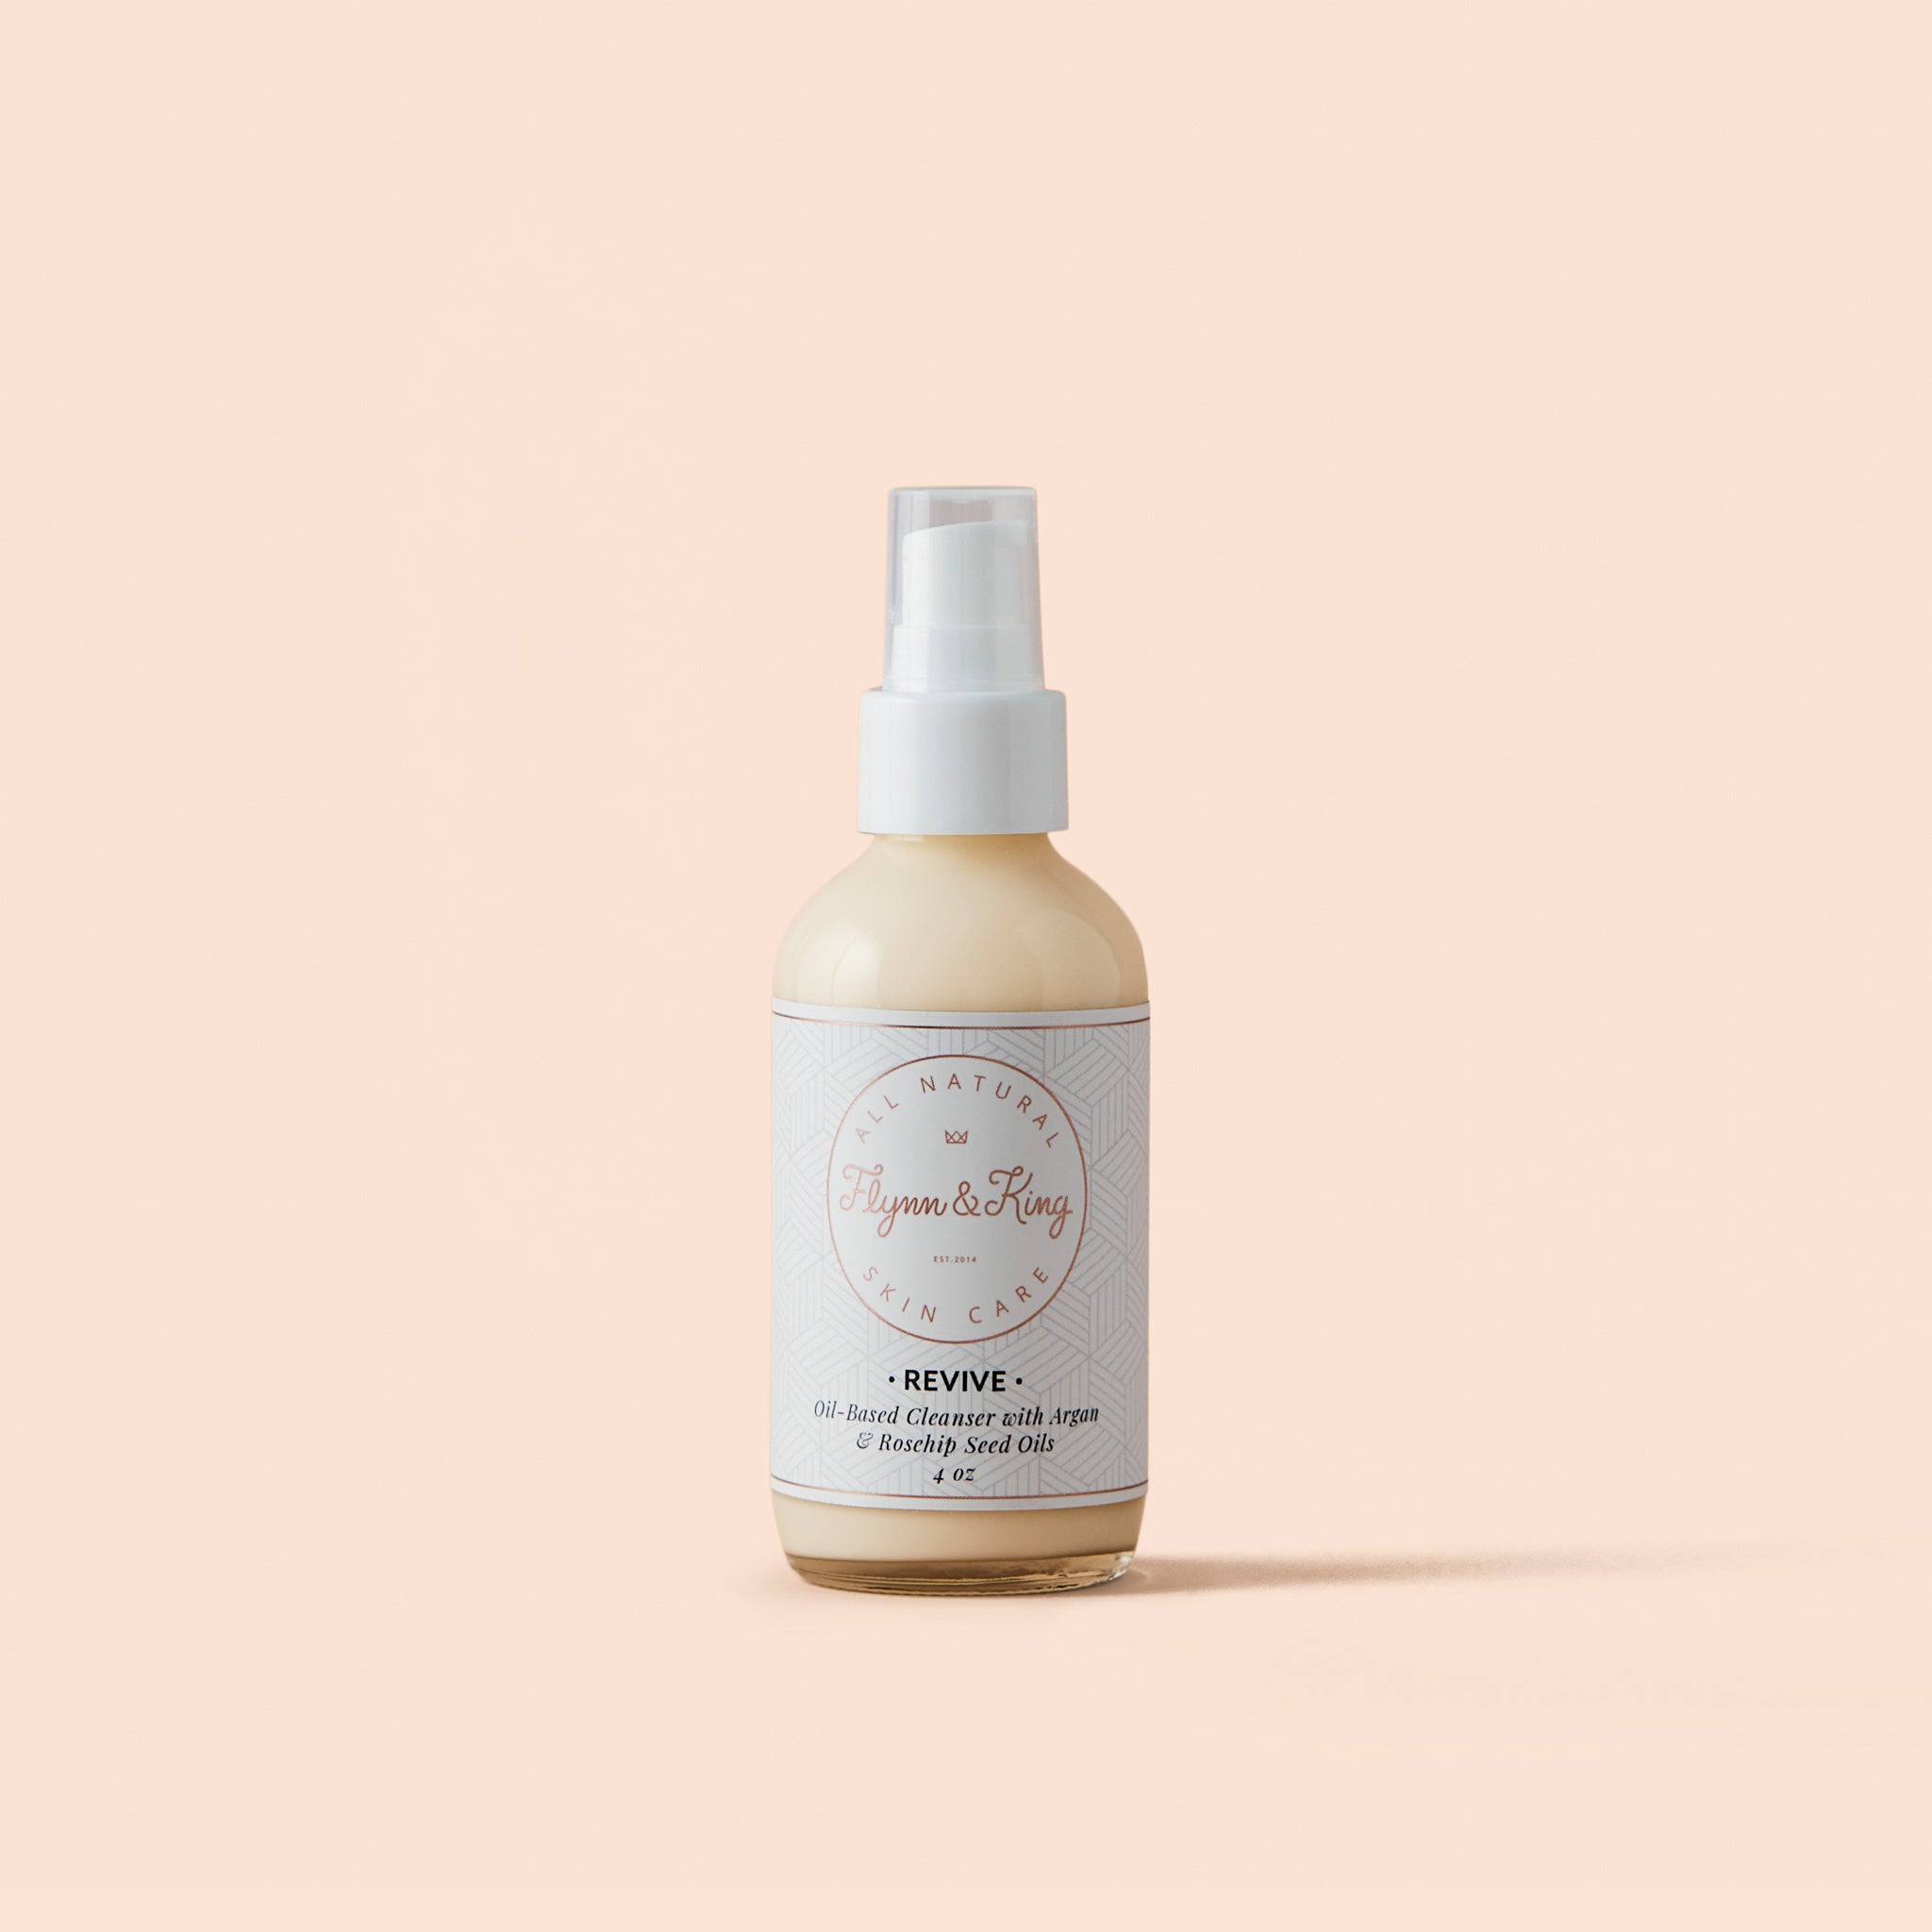 TRAVEL SIZE REVIVE - Oil-Based Cleanser with Argan and Rosehip Seed Oil